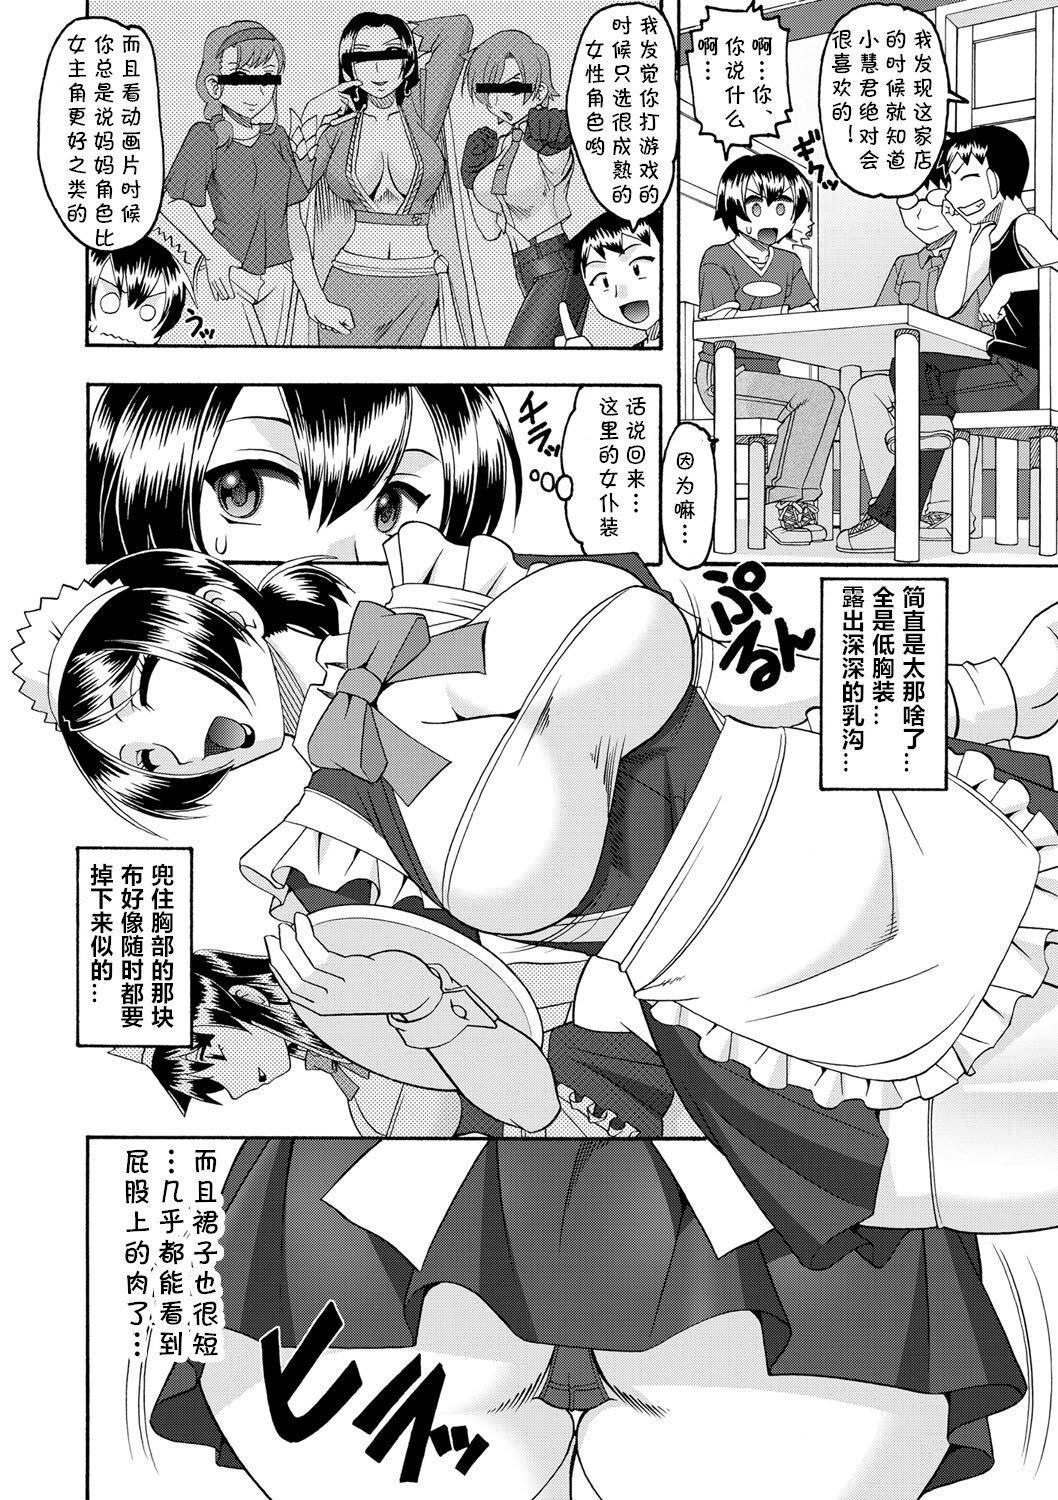 Maid-san OVER 30 Part 1 1